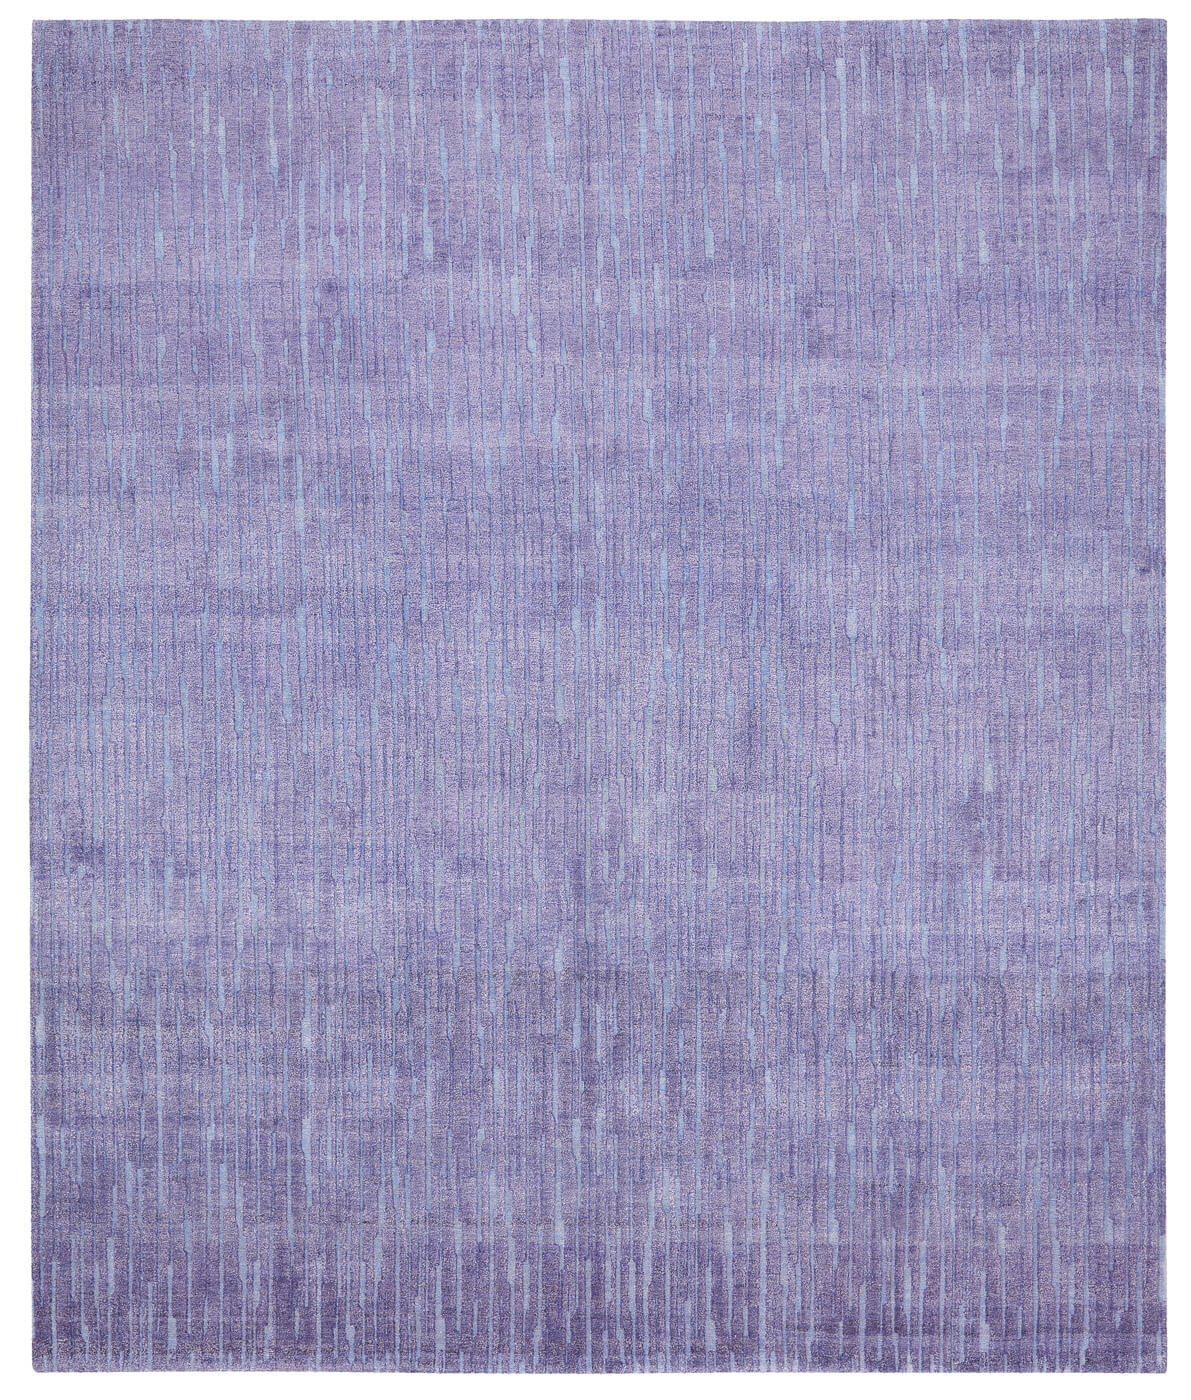 Violet Luxury Hand-woven Rug ☞ Size: 200 x 300 cm